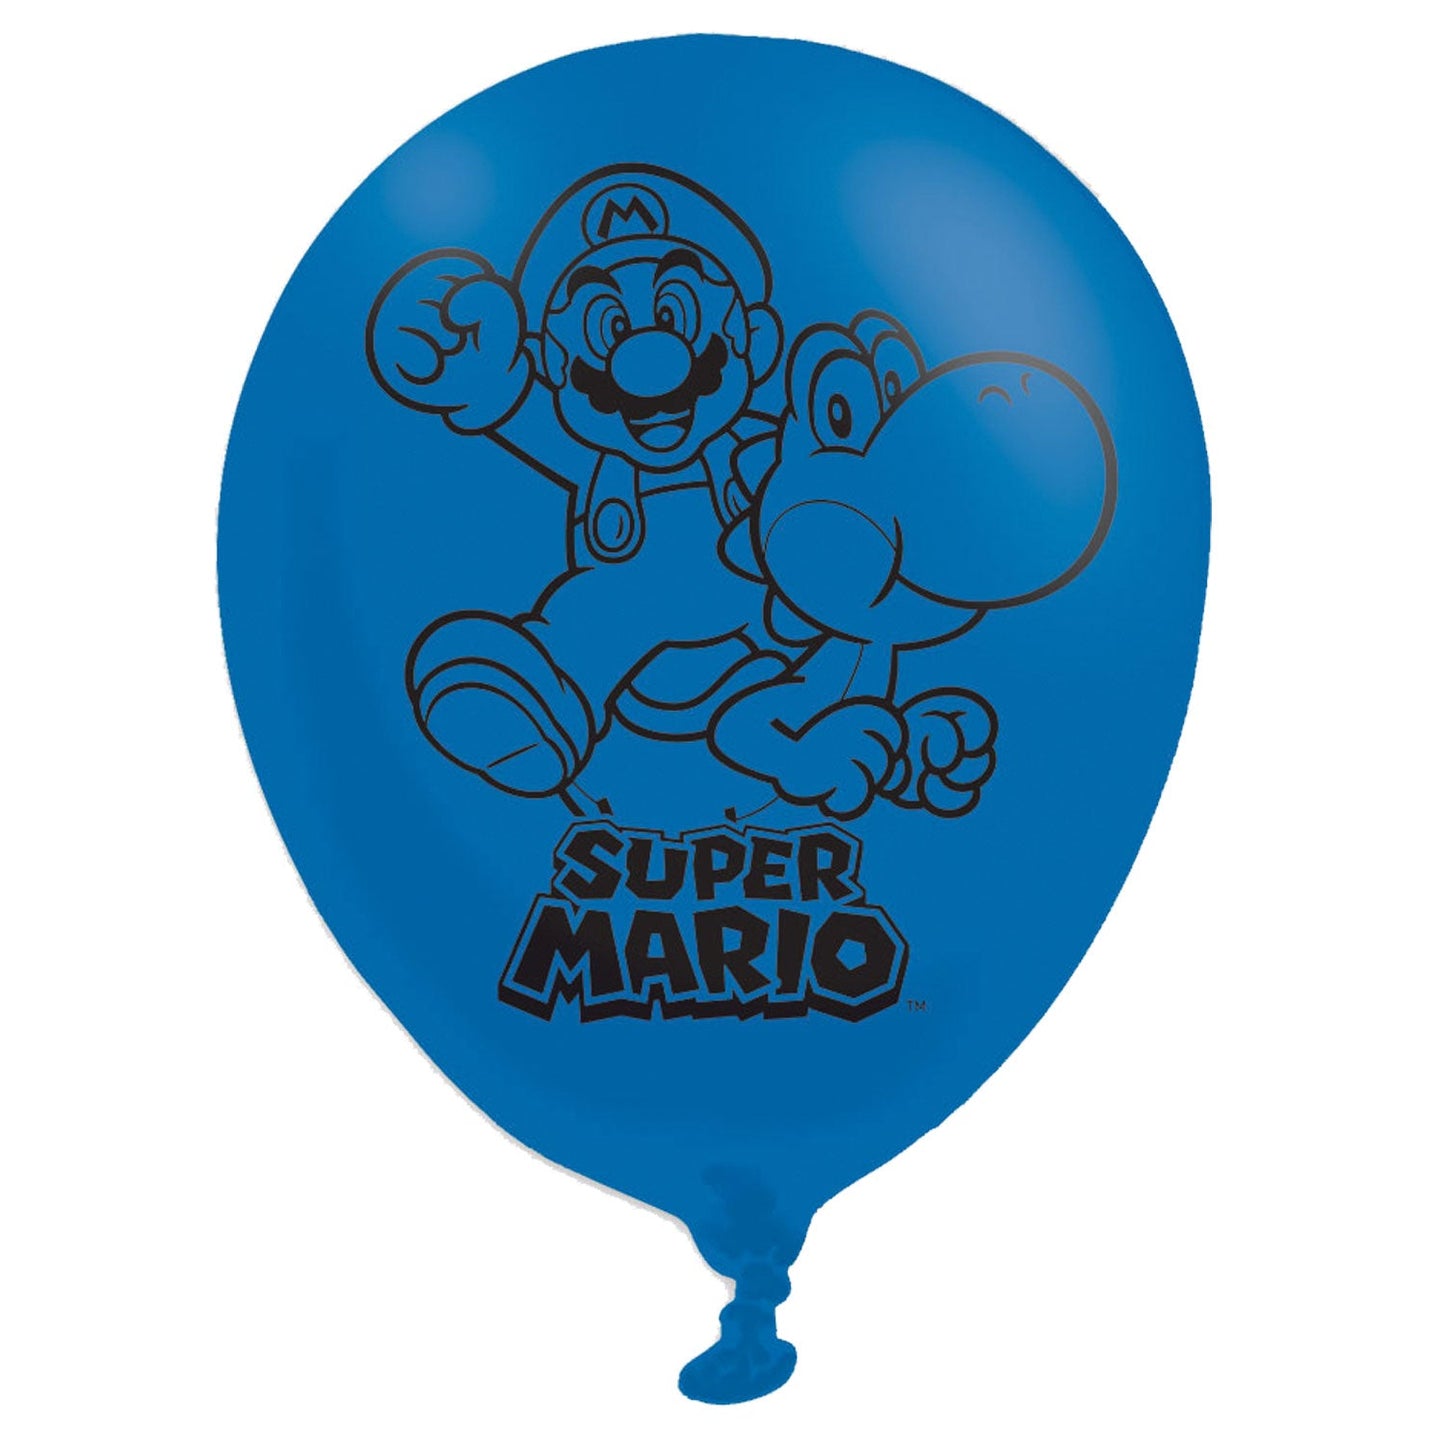 Super Mario Bros Latex Balloons. Will inflate to 11 inches (27.5cm).